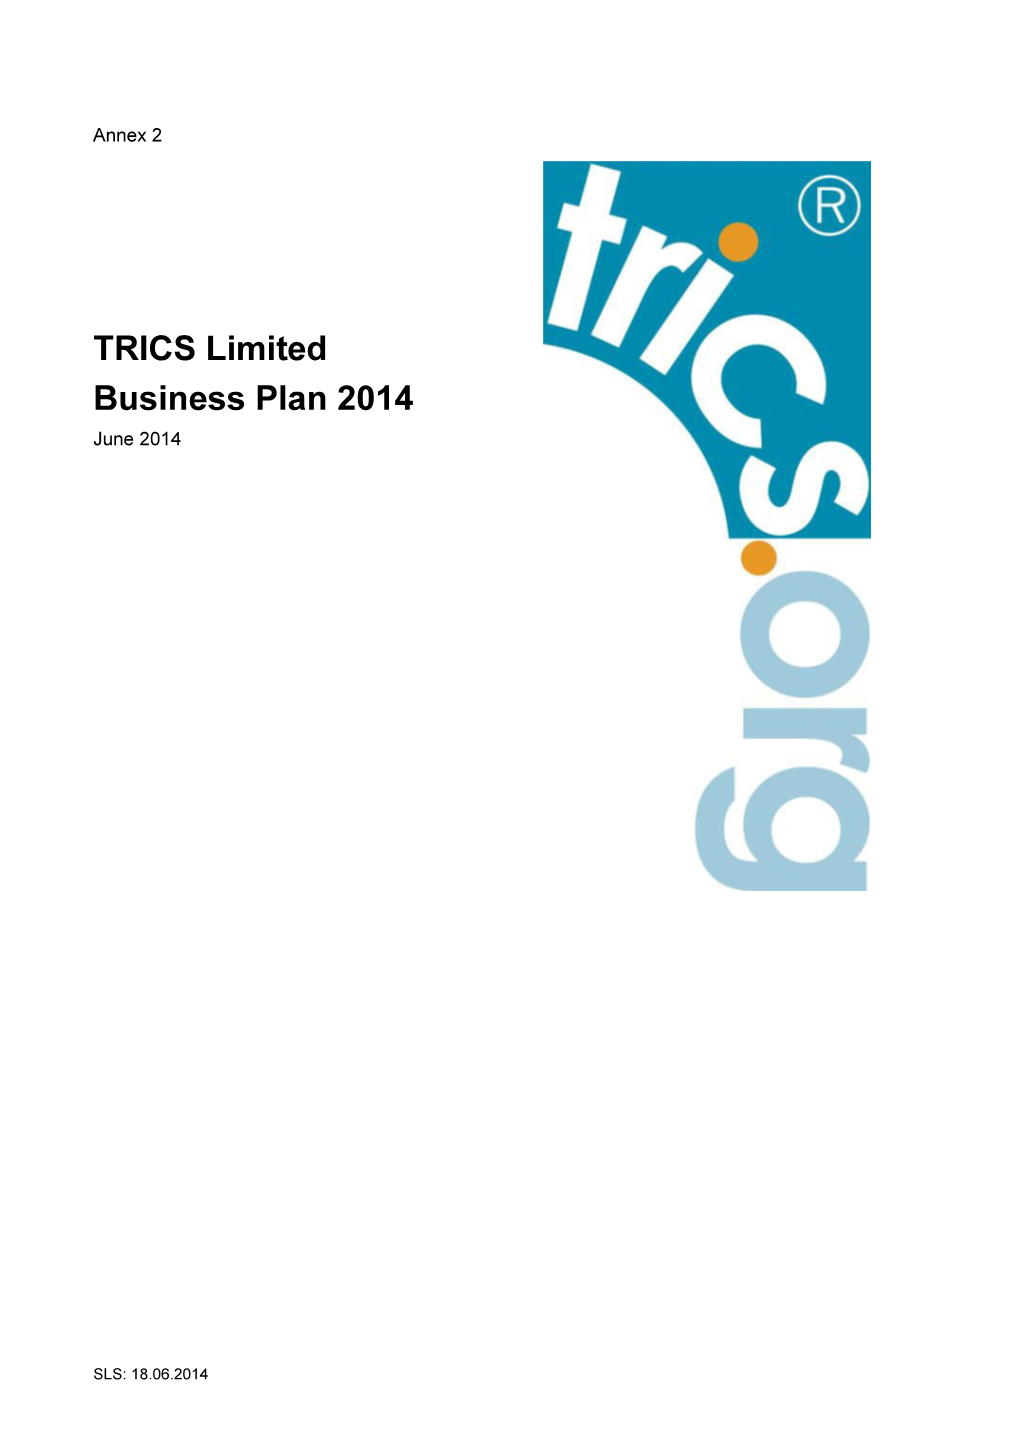 TRICS Limited Business Plan 2014